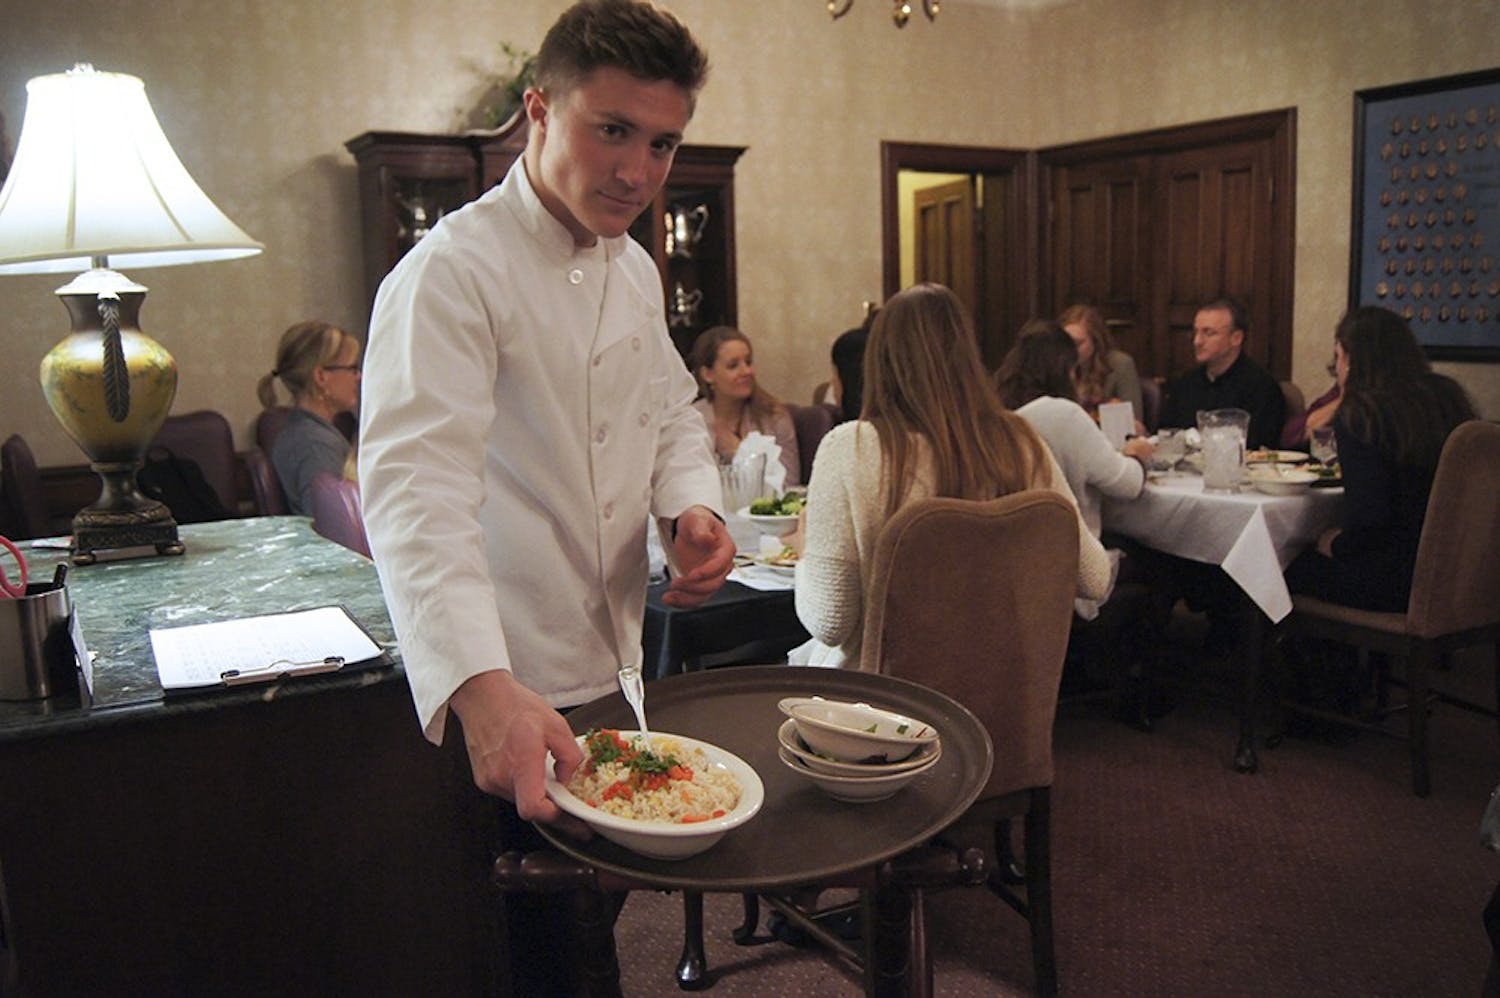 Evans Scholar Jack Conway helps serve formal dinner at the Kappa Alpha Theta house on Wednesday. Evans Scholars work as kitchen staff at a sorority house of their choice to supplement for their house not having a kitchen. This opportunity provides the Scholars with meals, and a paid job as well. 